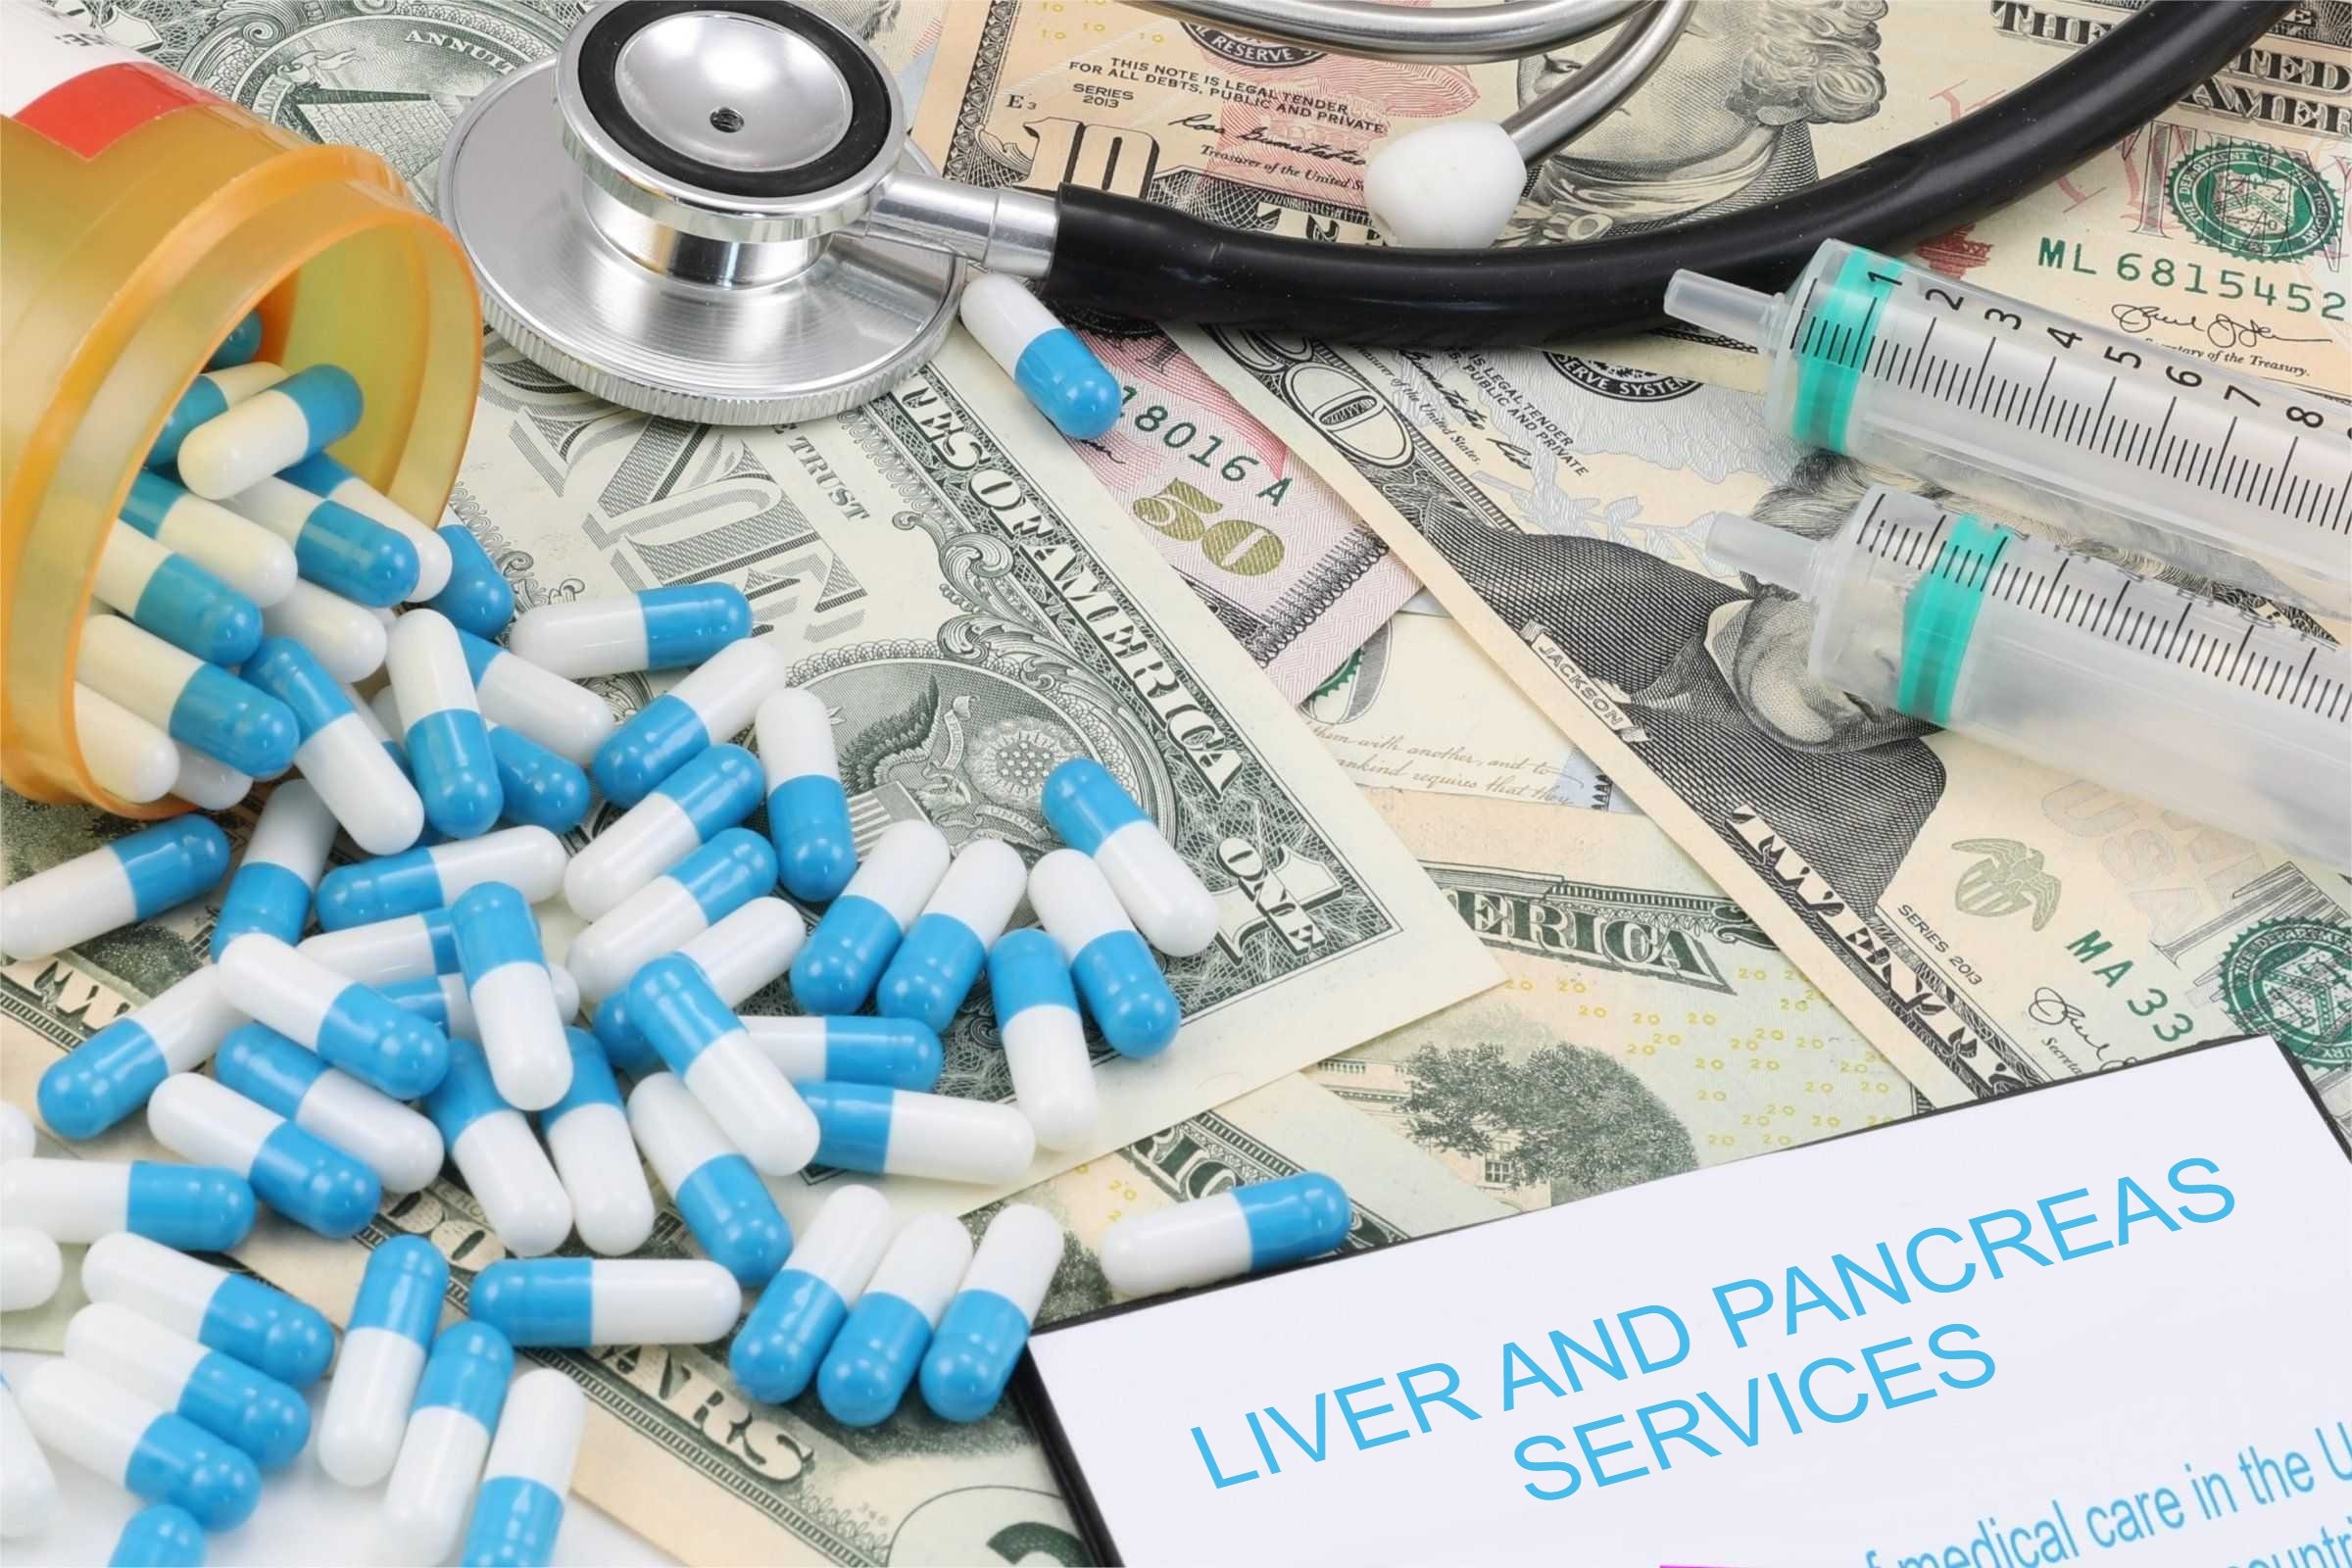 liver and pancreas services